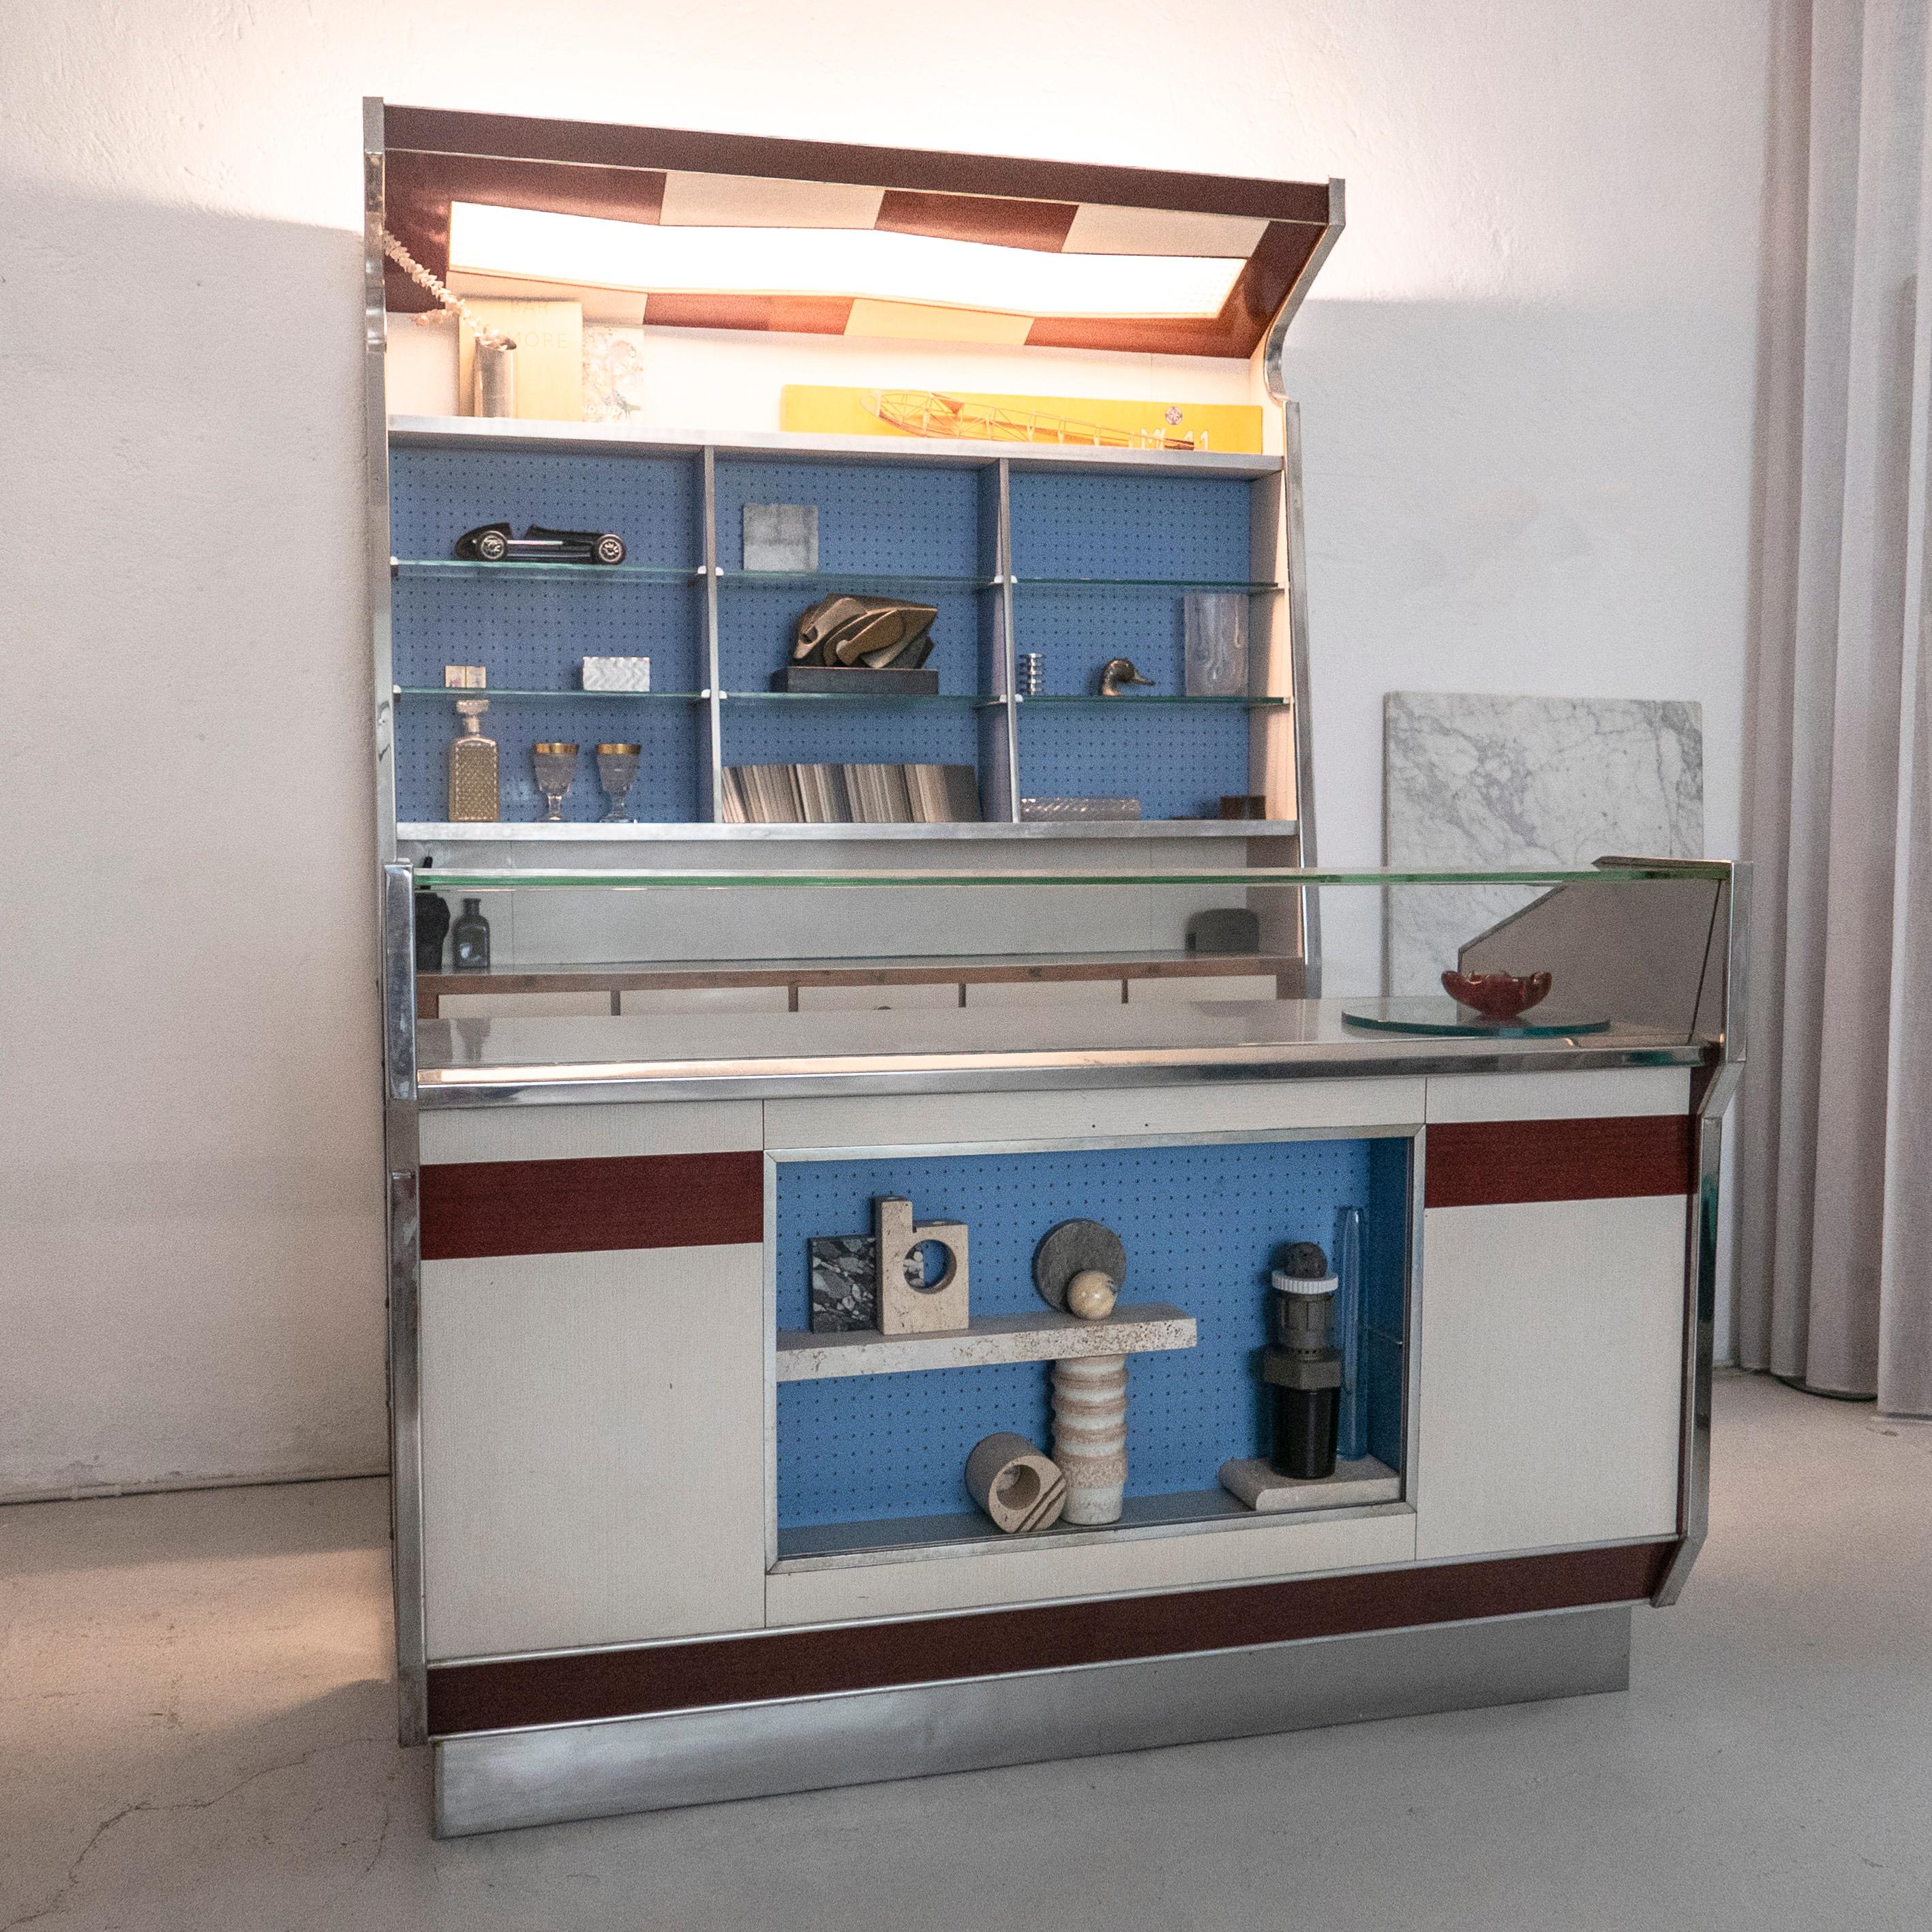 Mid-20th Century Vintage Italian Bar Counter in Wood and Veneer from the 1950s, Old Milanese Bar